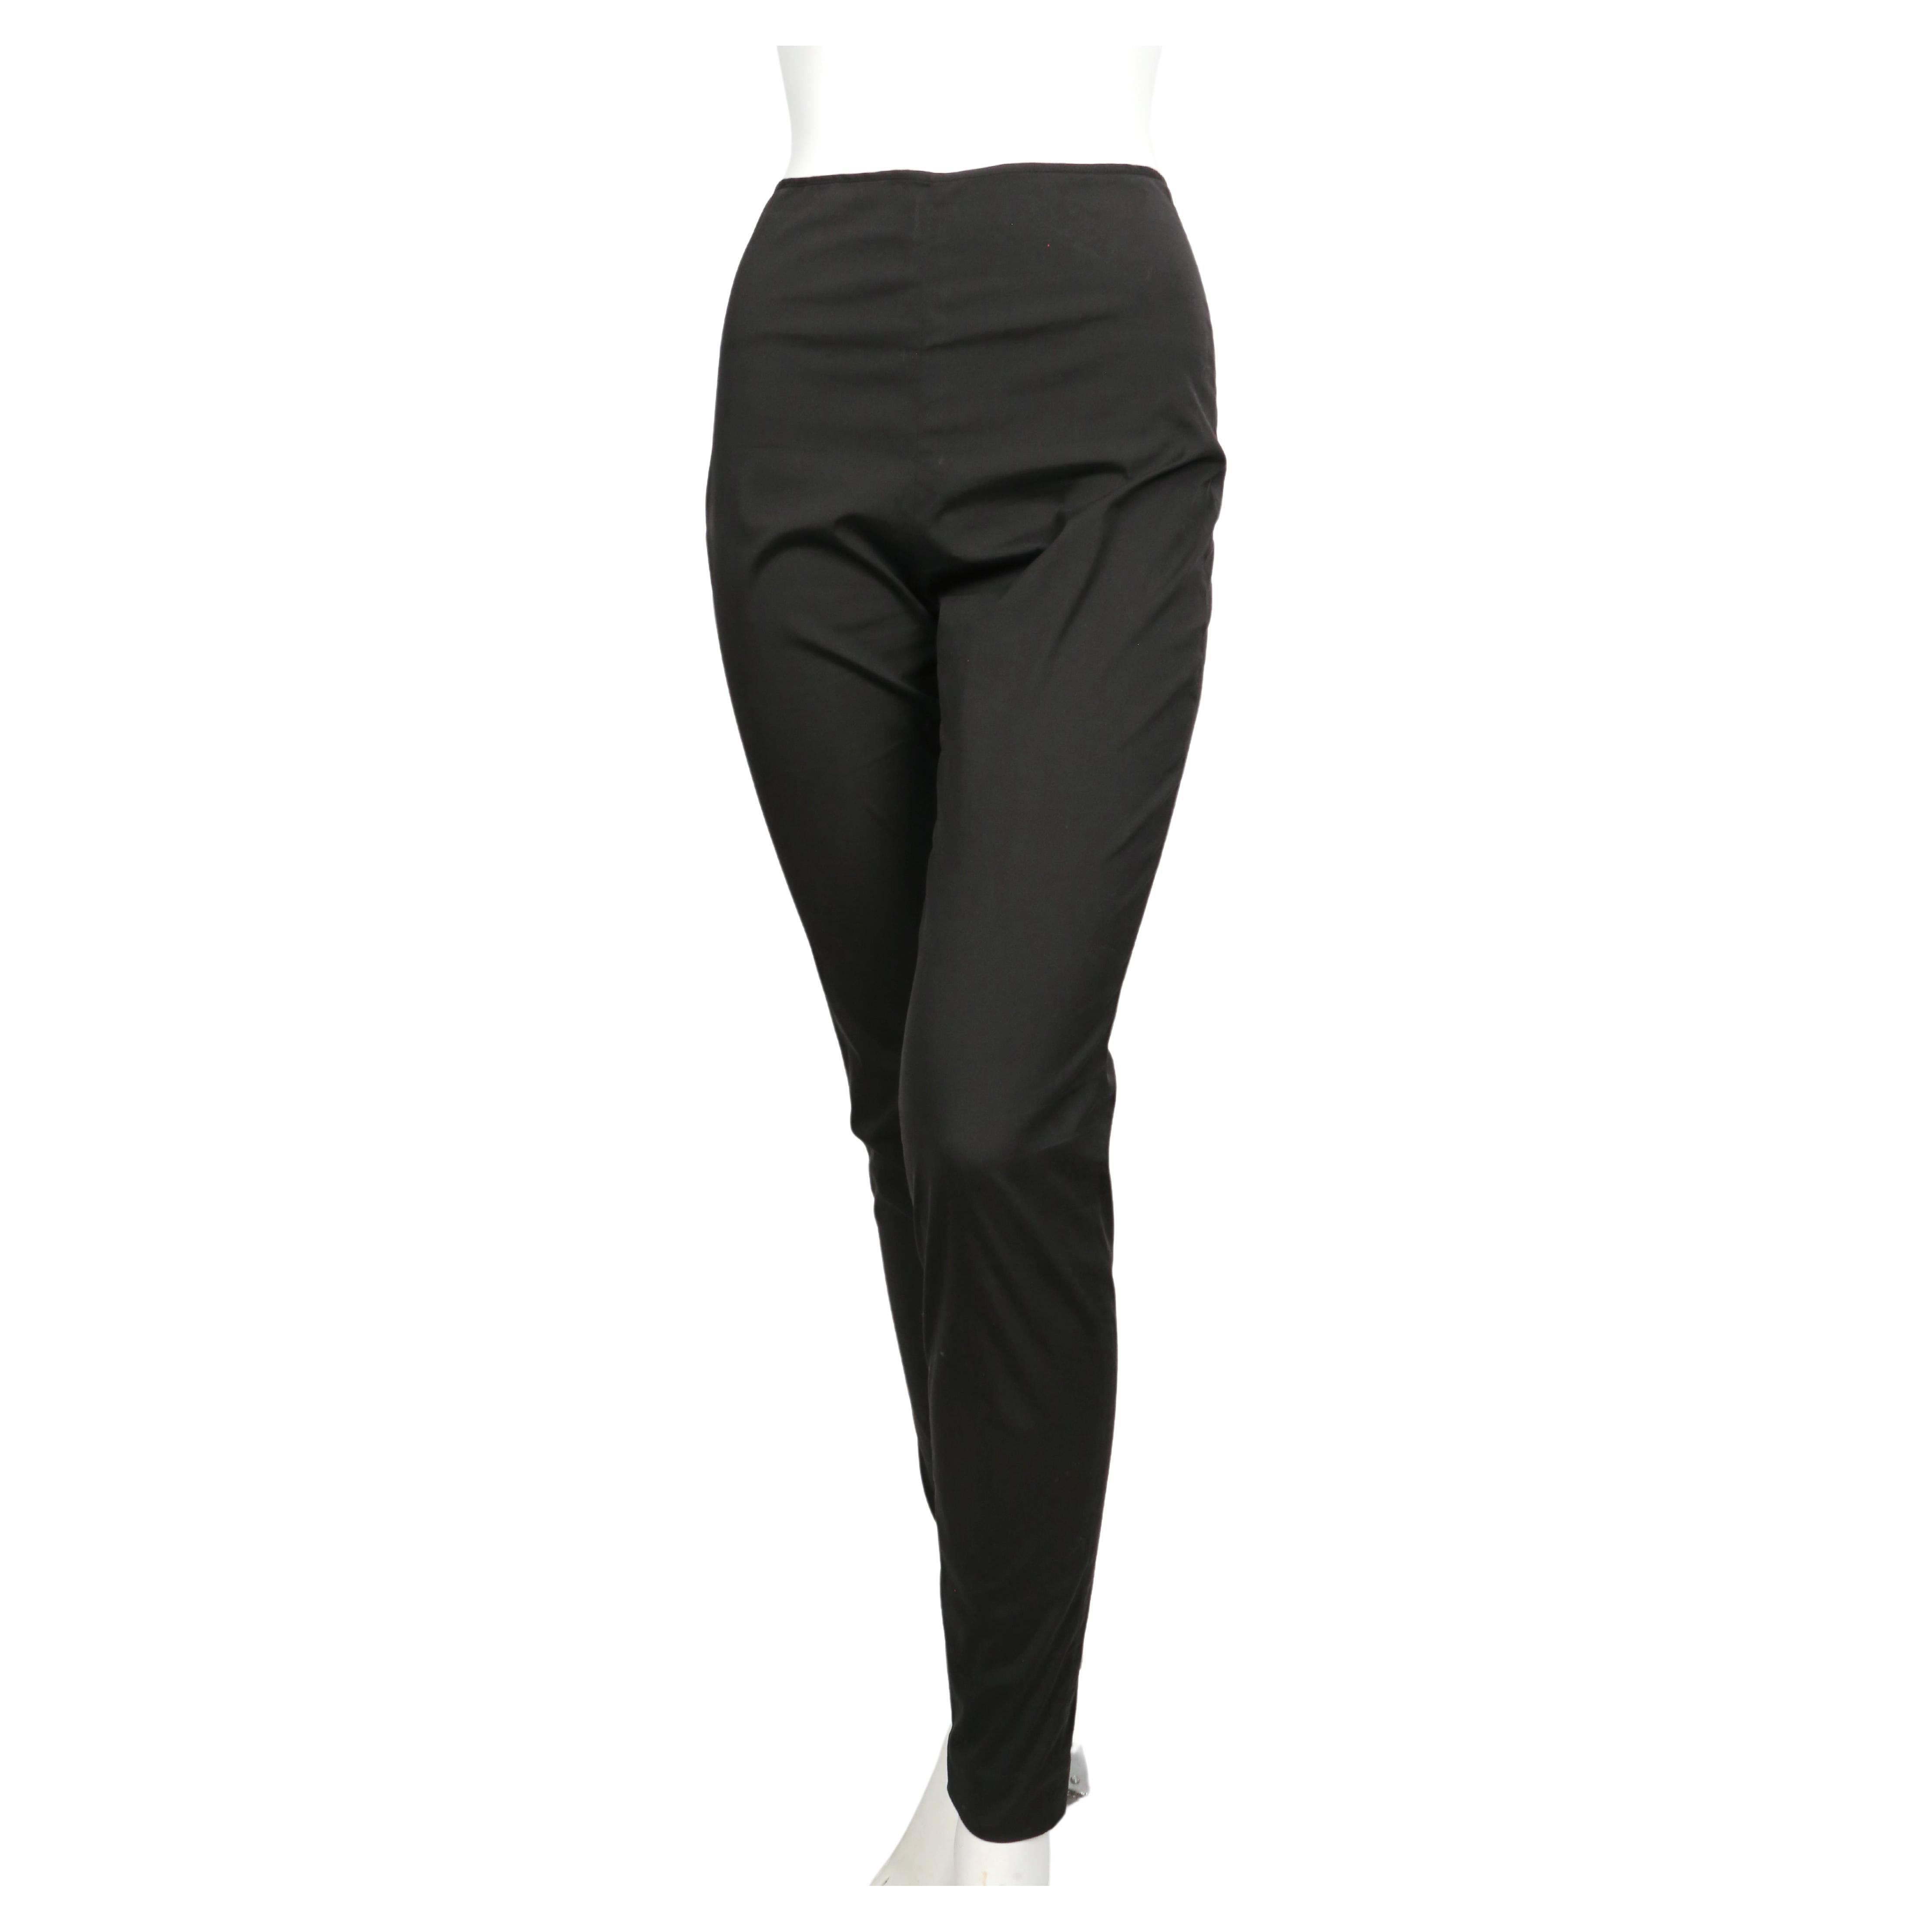 Black fitted high waist pants with ankle zippers designed by Jean Paul Gaultier dating to the late 1990's. French size 38. Pants were not clipped on French size 36 mannequin. Approximate measurements (unstretched), waist 25